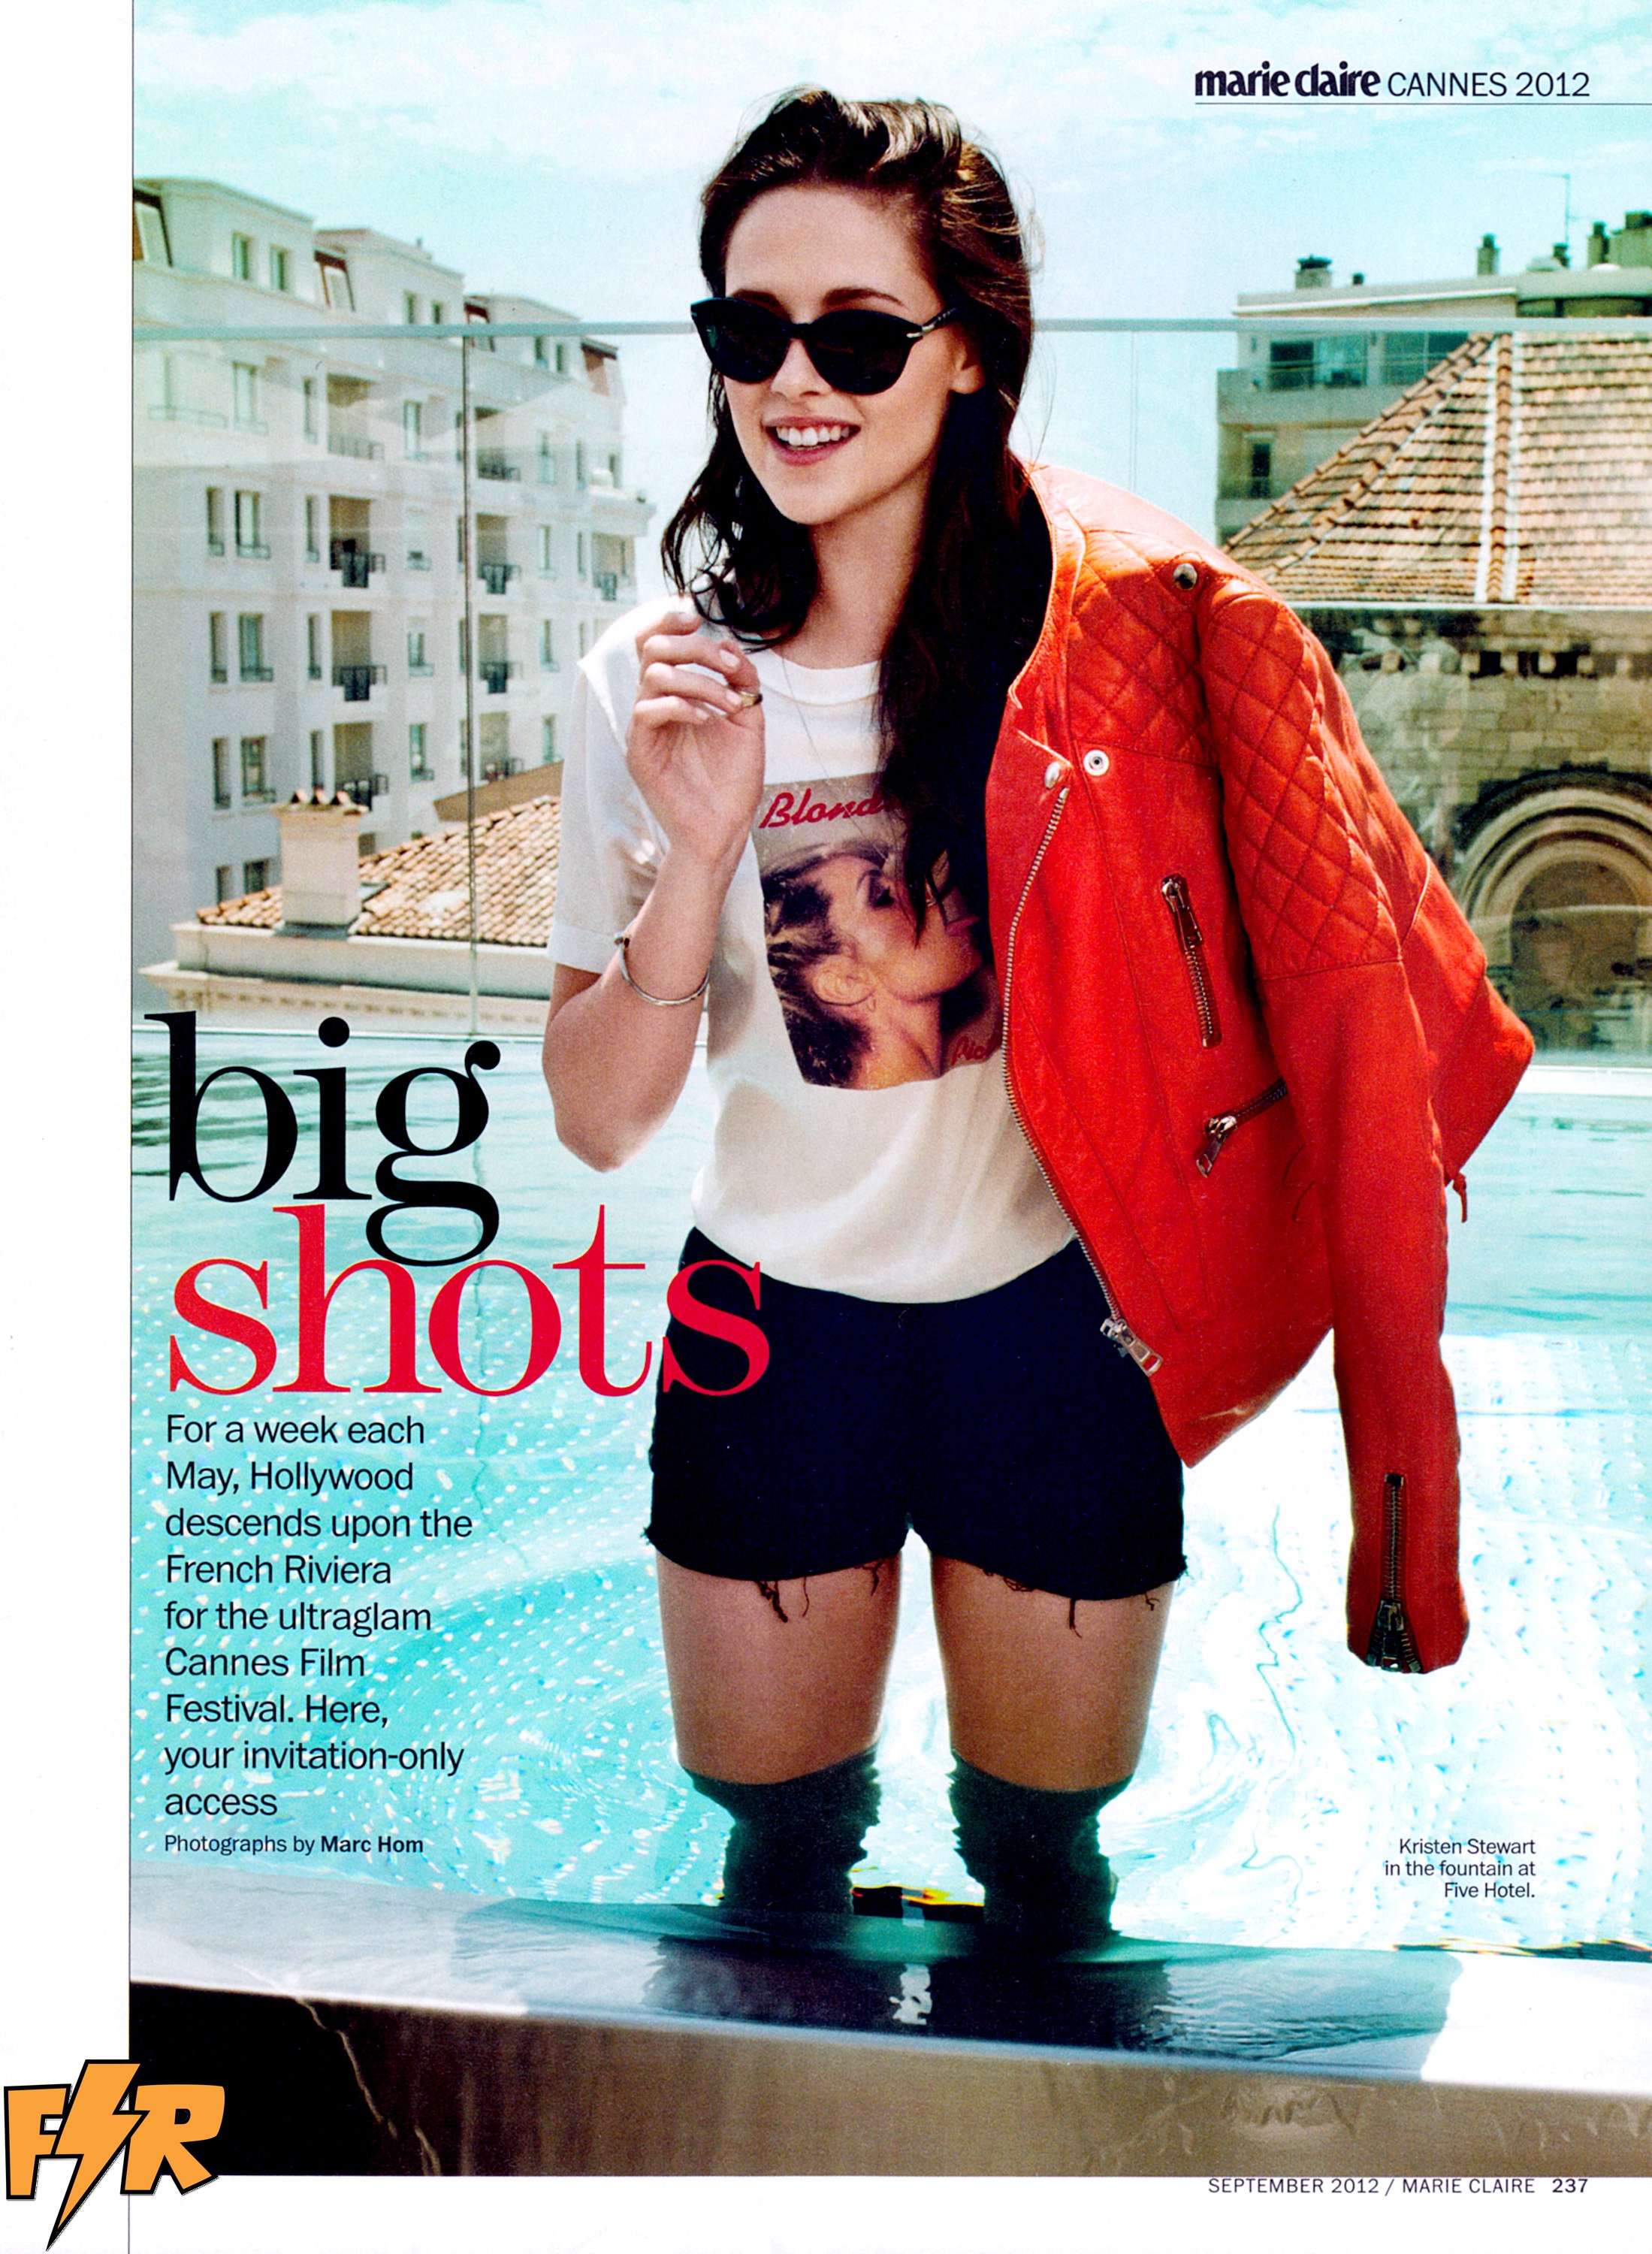 fashion_scans_remastered-kristen_stewart-marie_claire_usa-september_2012-scanned_by_vampirehorde-hq-